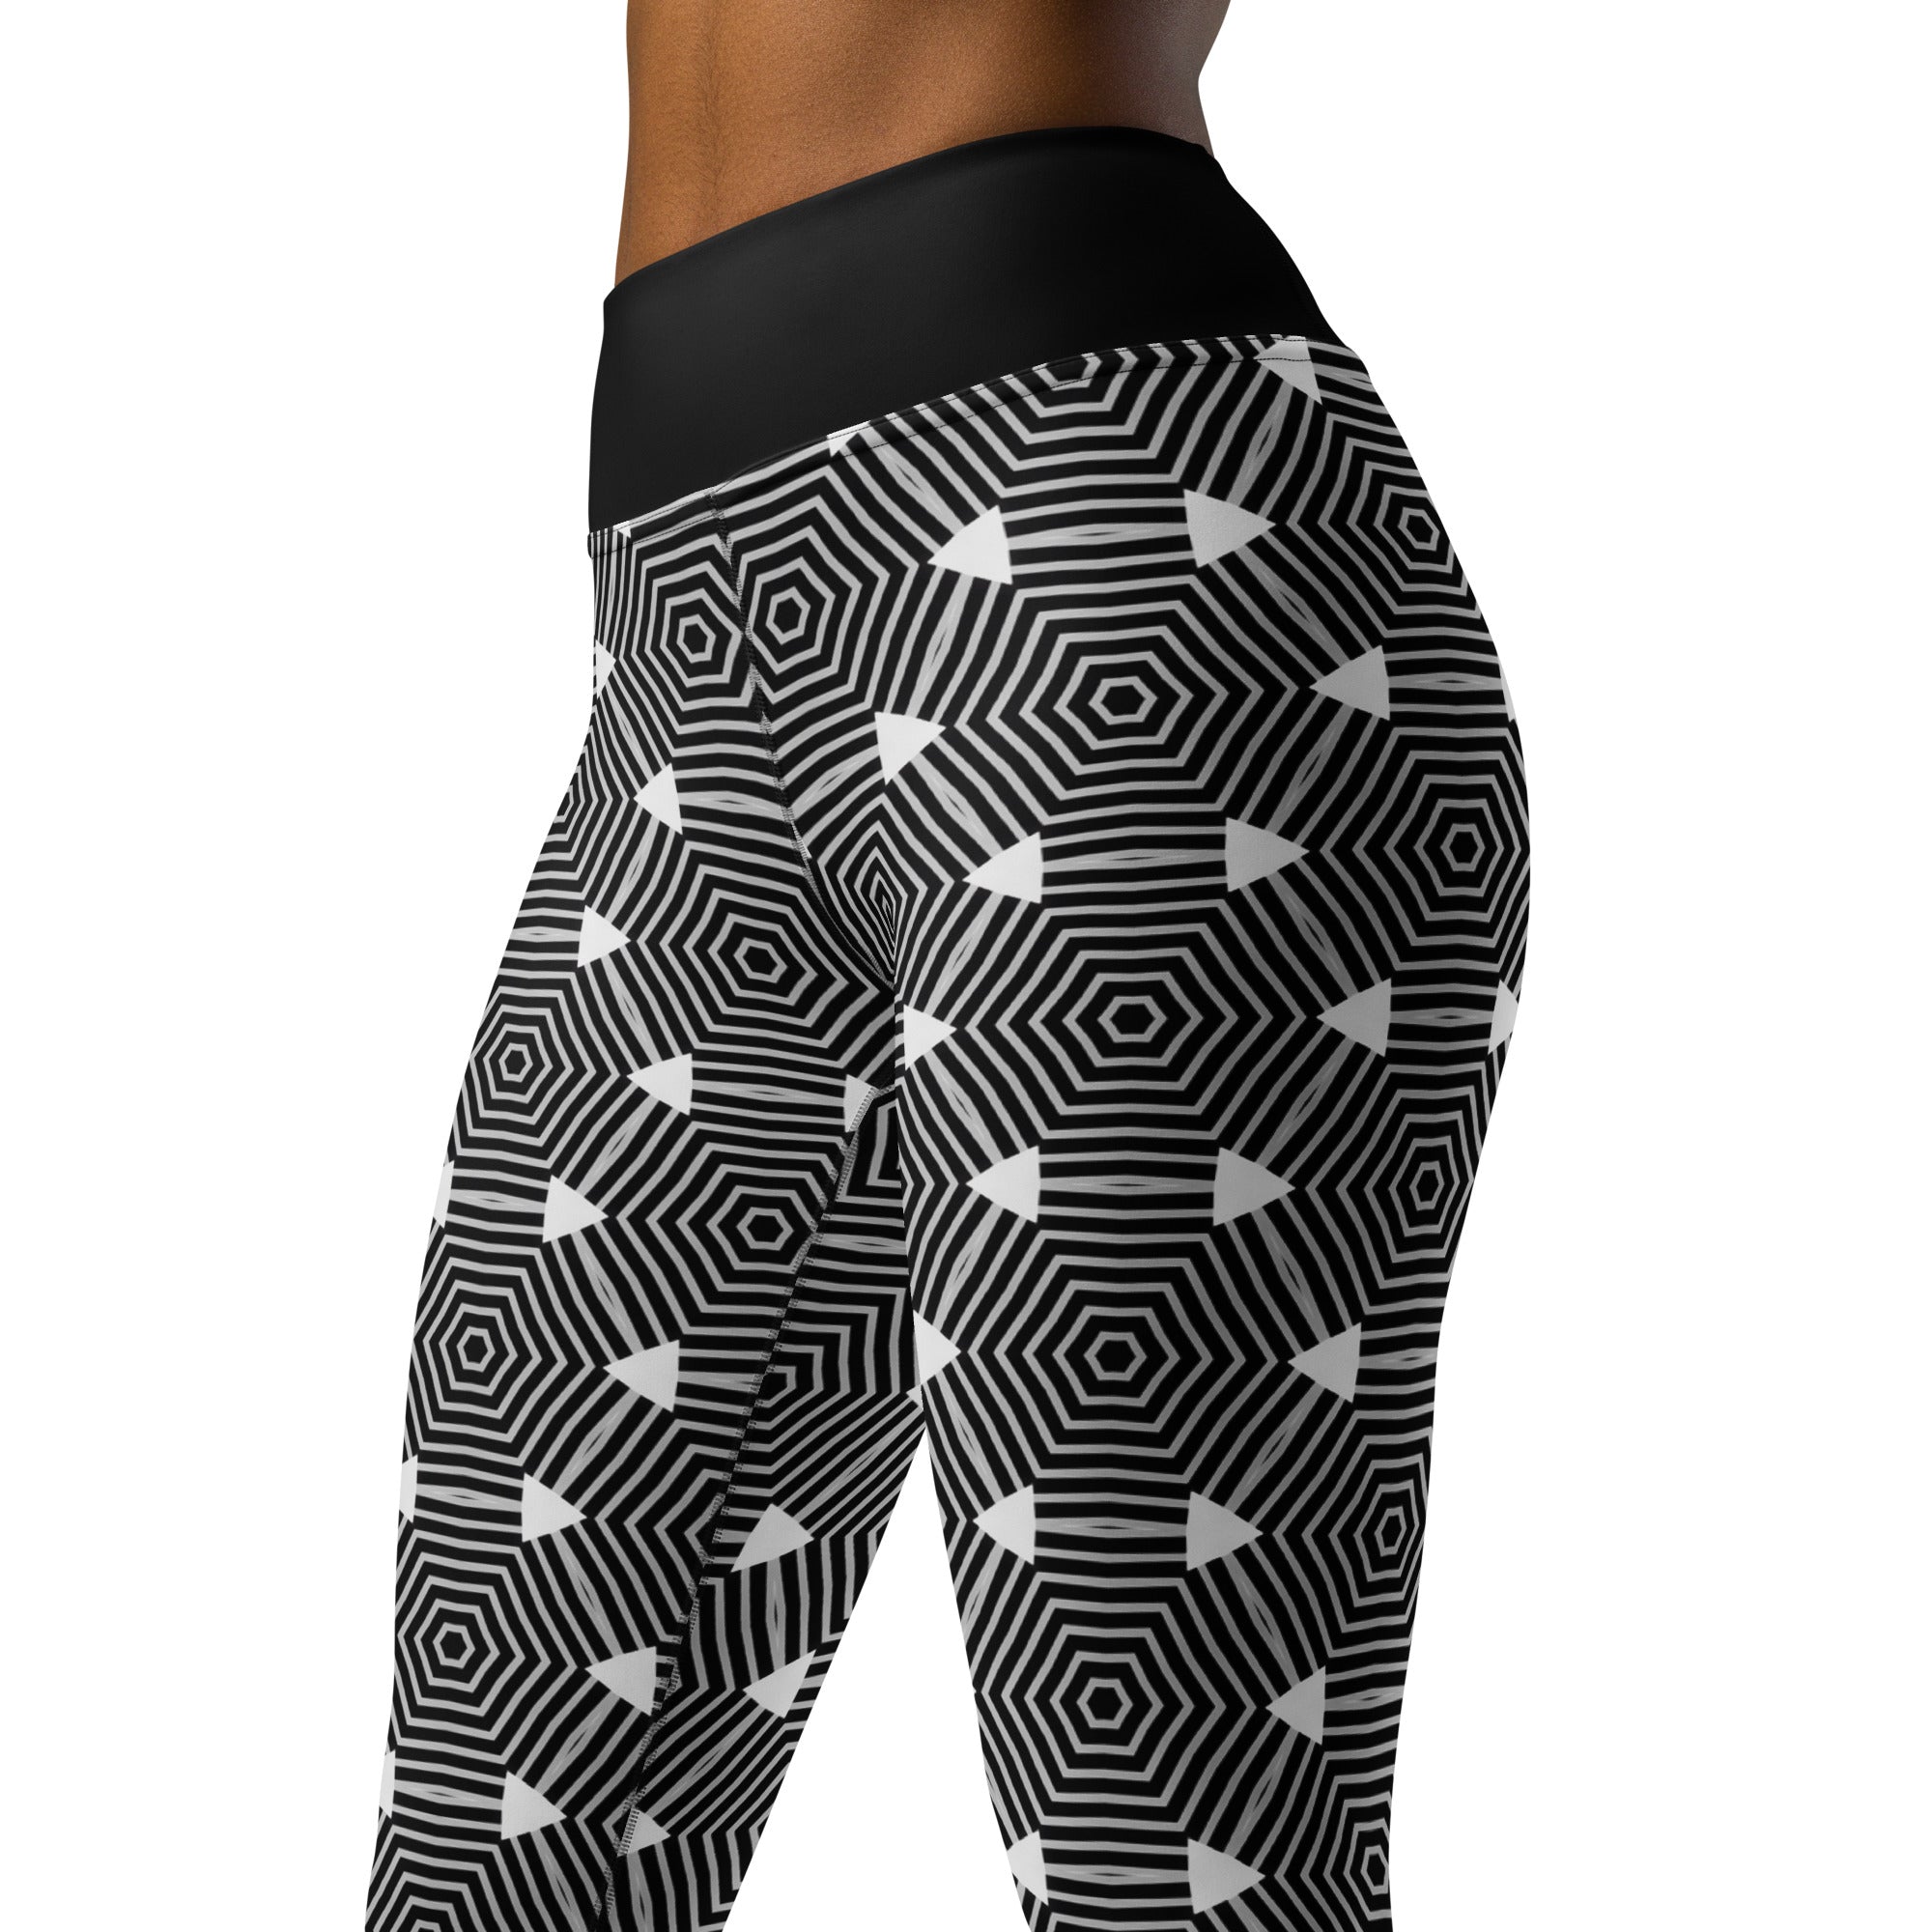 High-quality Kaleidoscope Yoga Leggings perfect for yoga, pilates, and fitness activities.